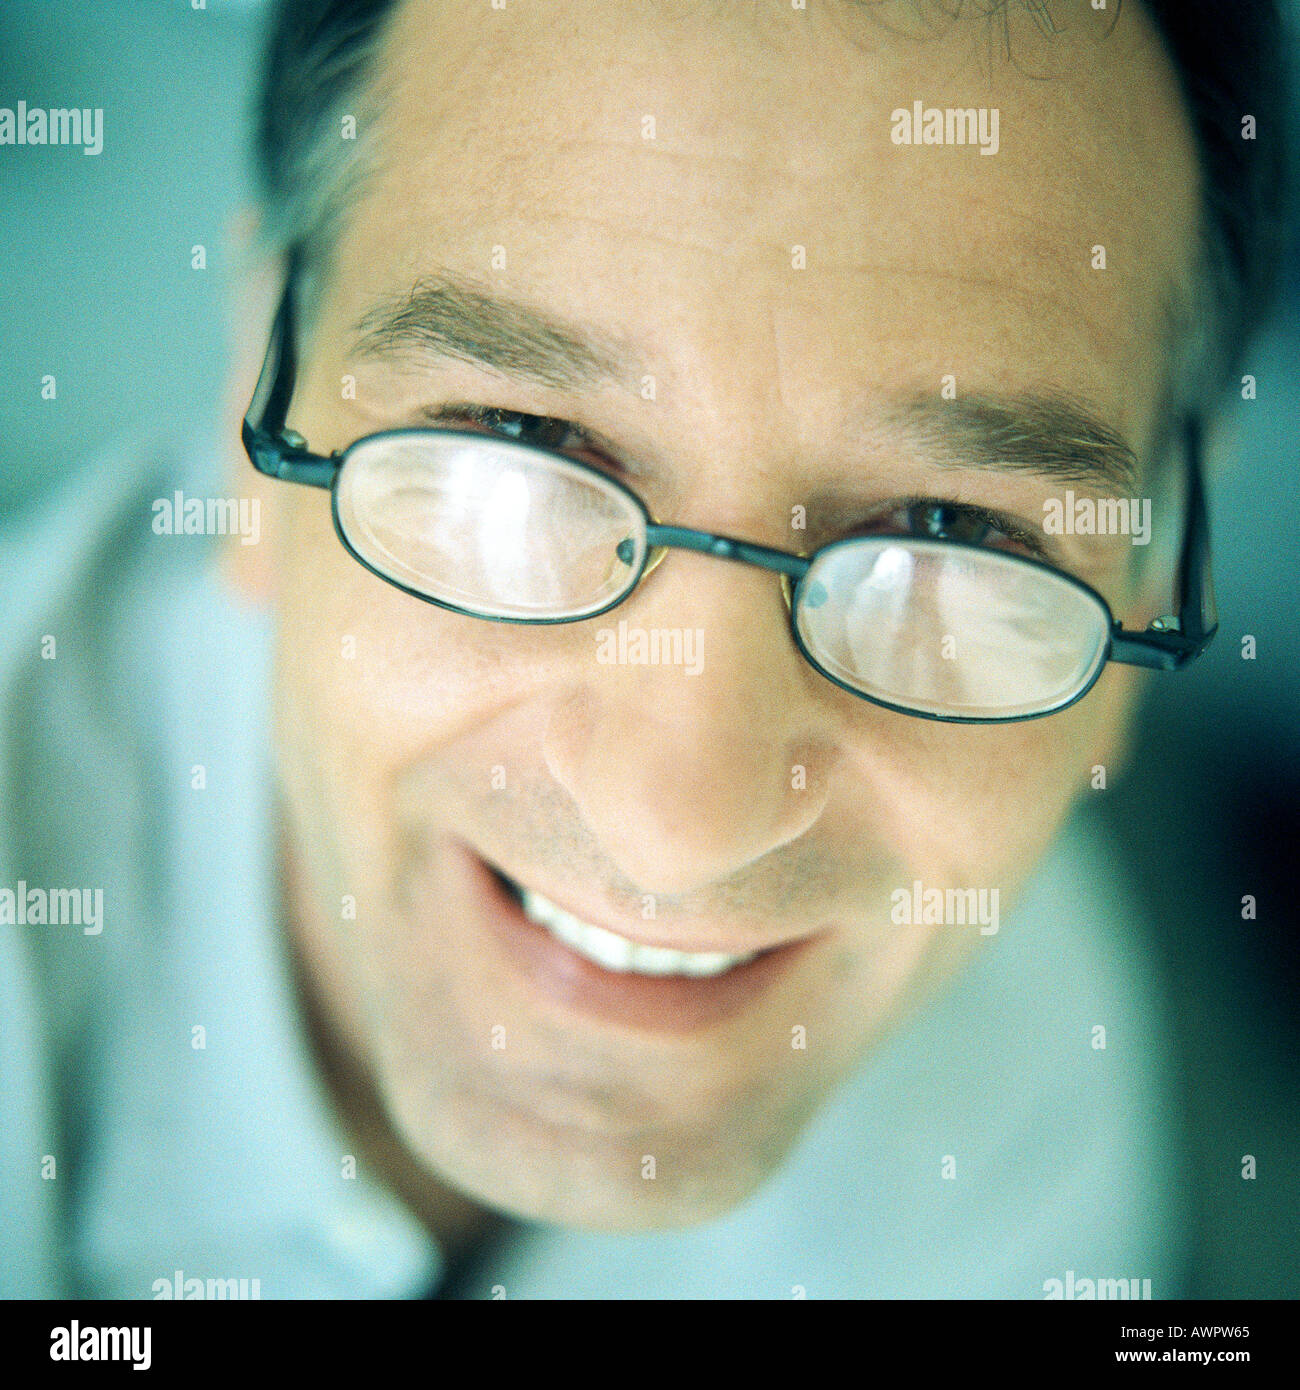 Portrait of man wearing glasses, close-up Stock Photo